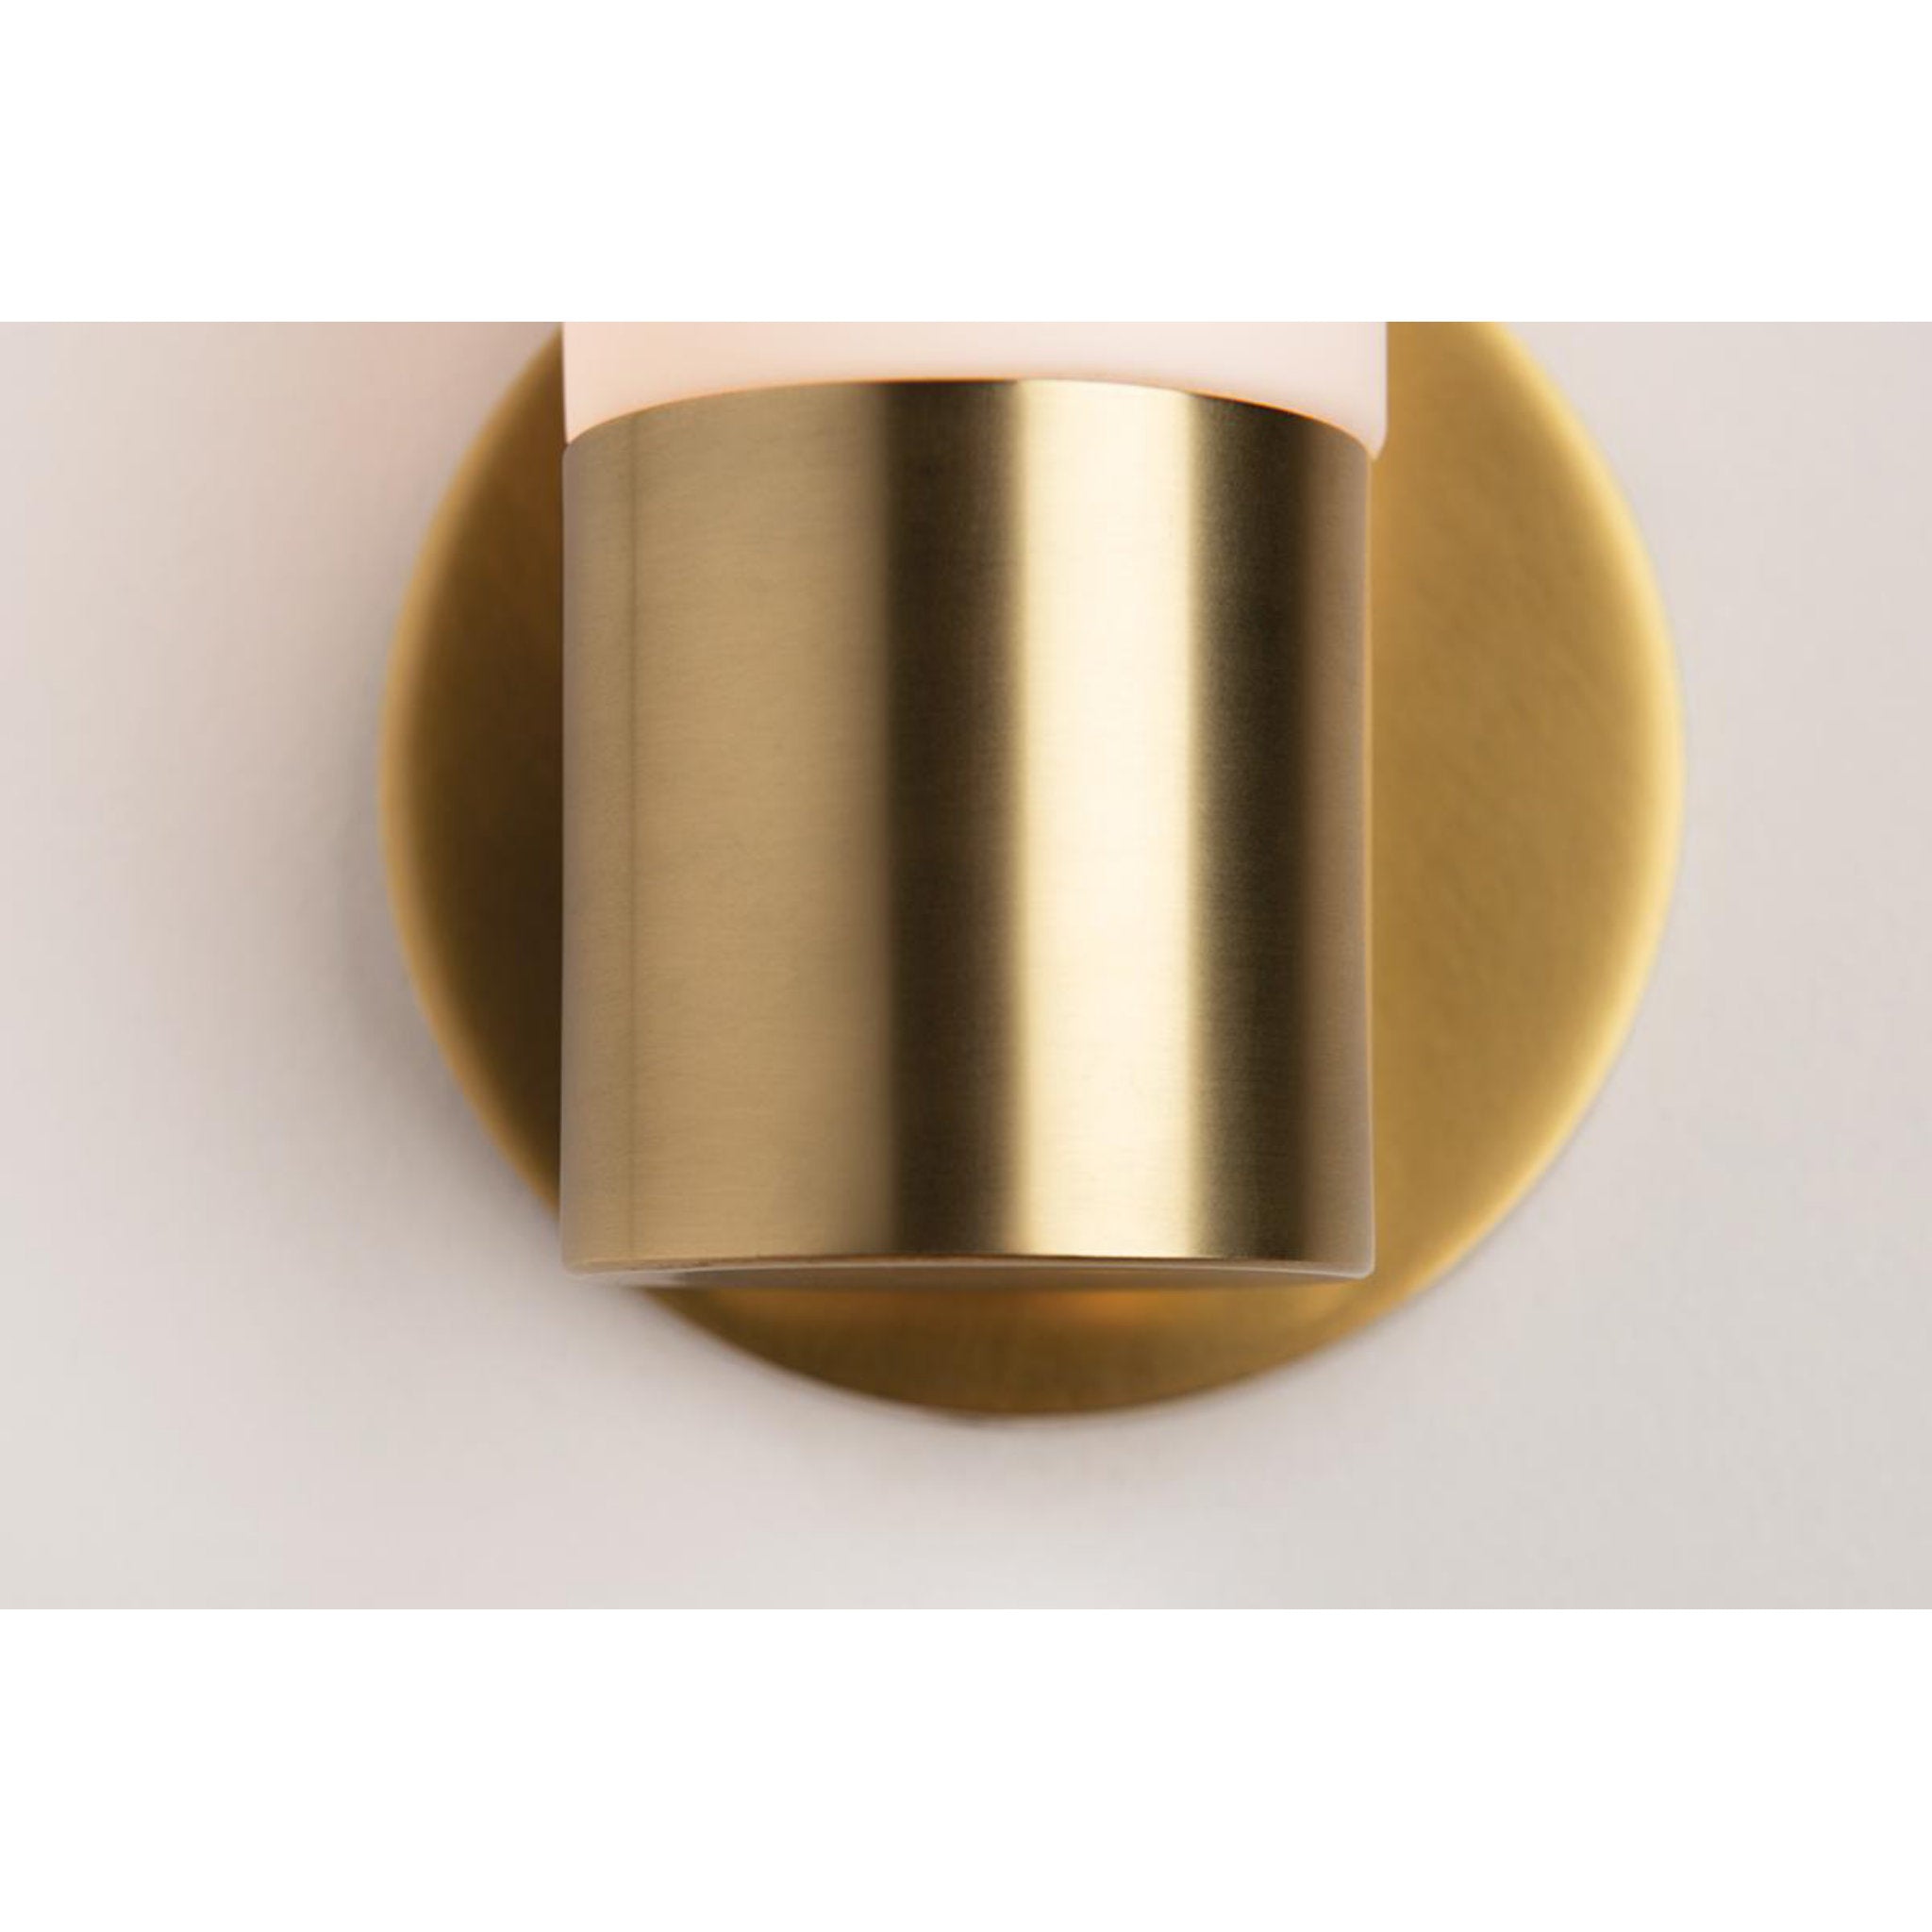 Lola 2-Light Wall Sconce in Aged Brass